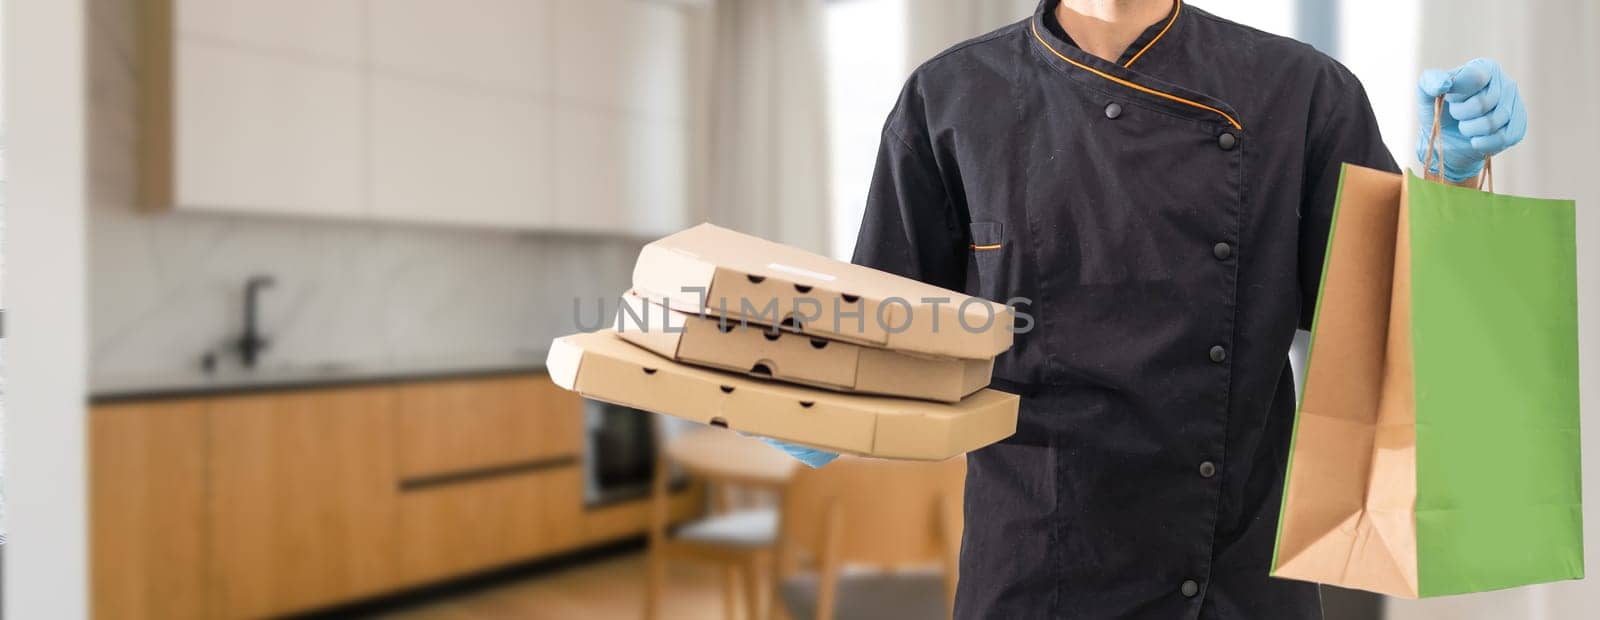 Paper pocket and food containers in hands of a smiling deliveryman. .Quality service of a restaurant